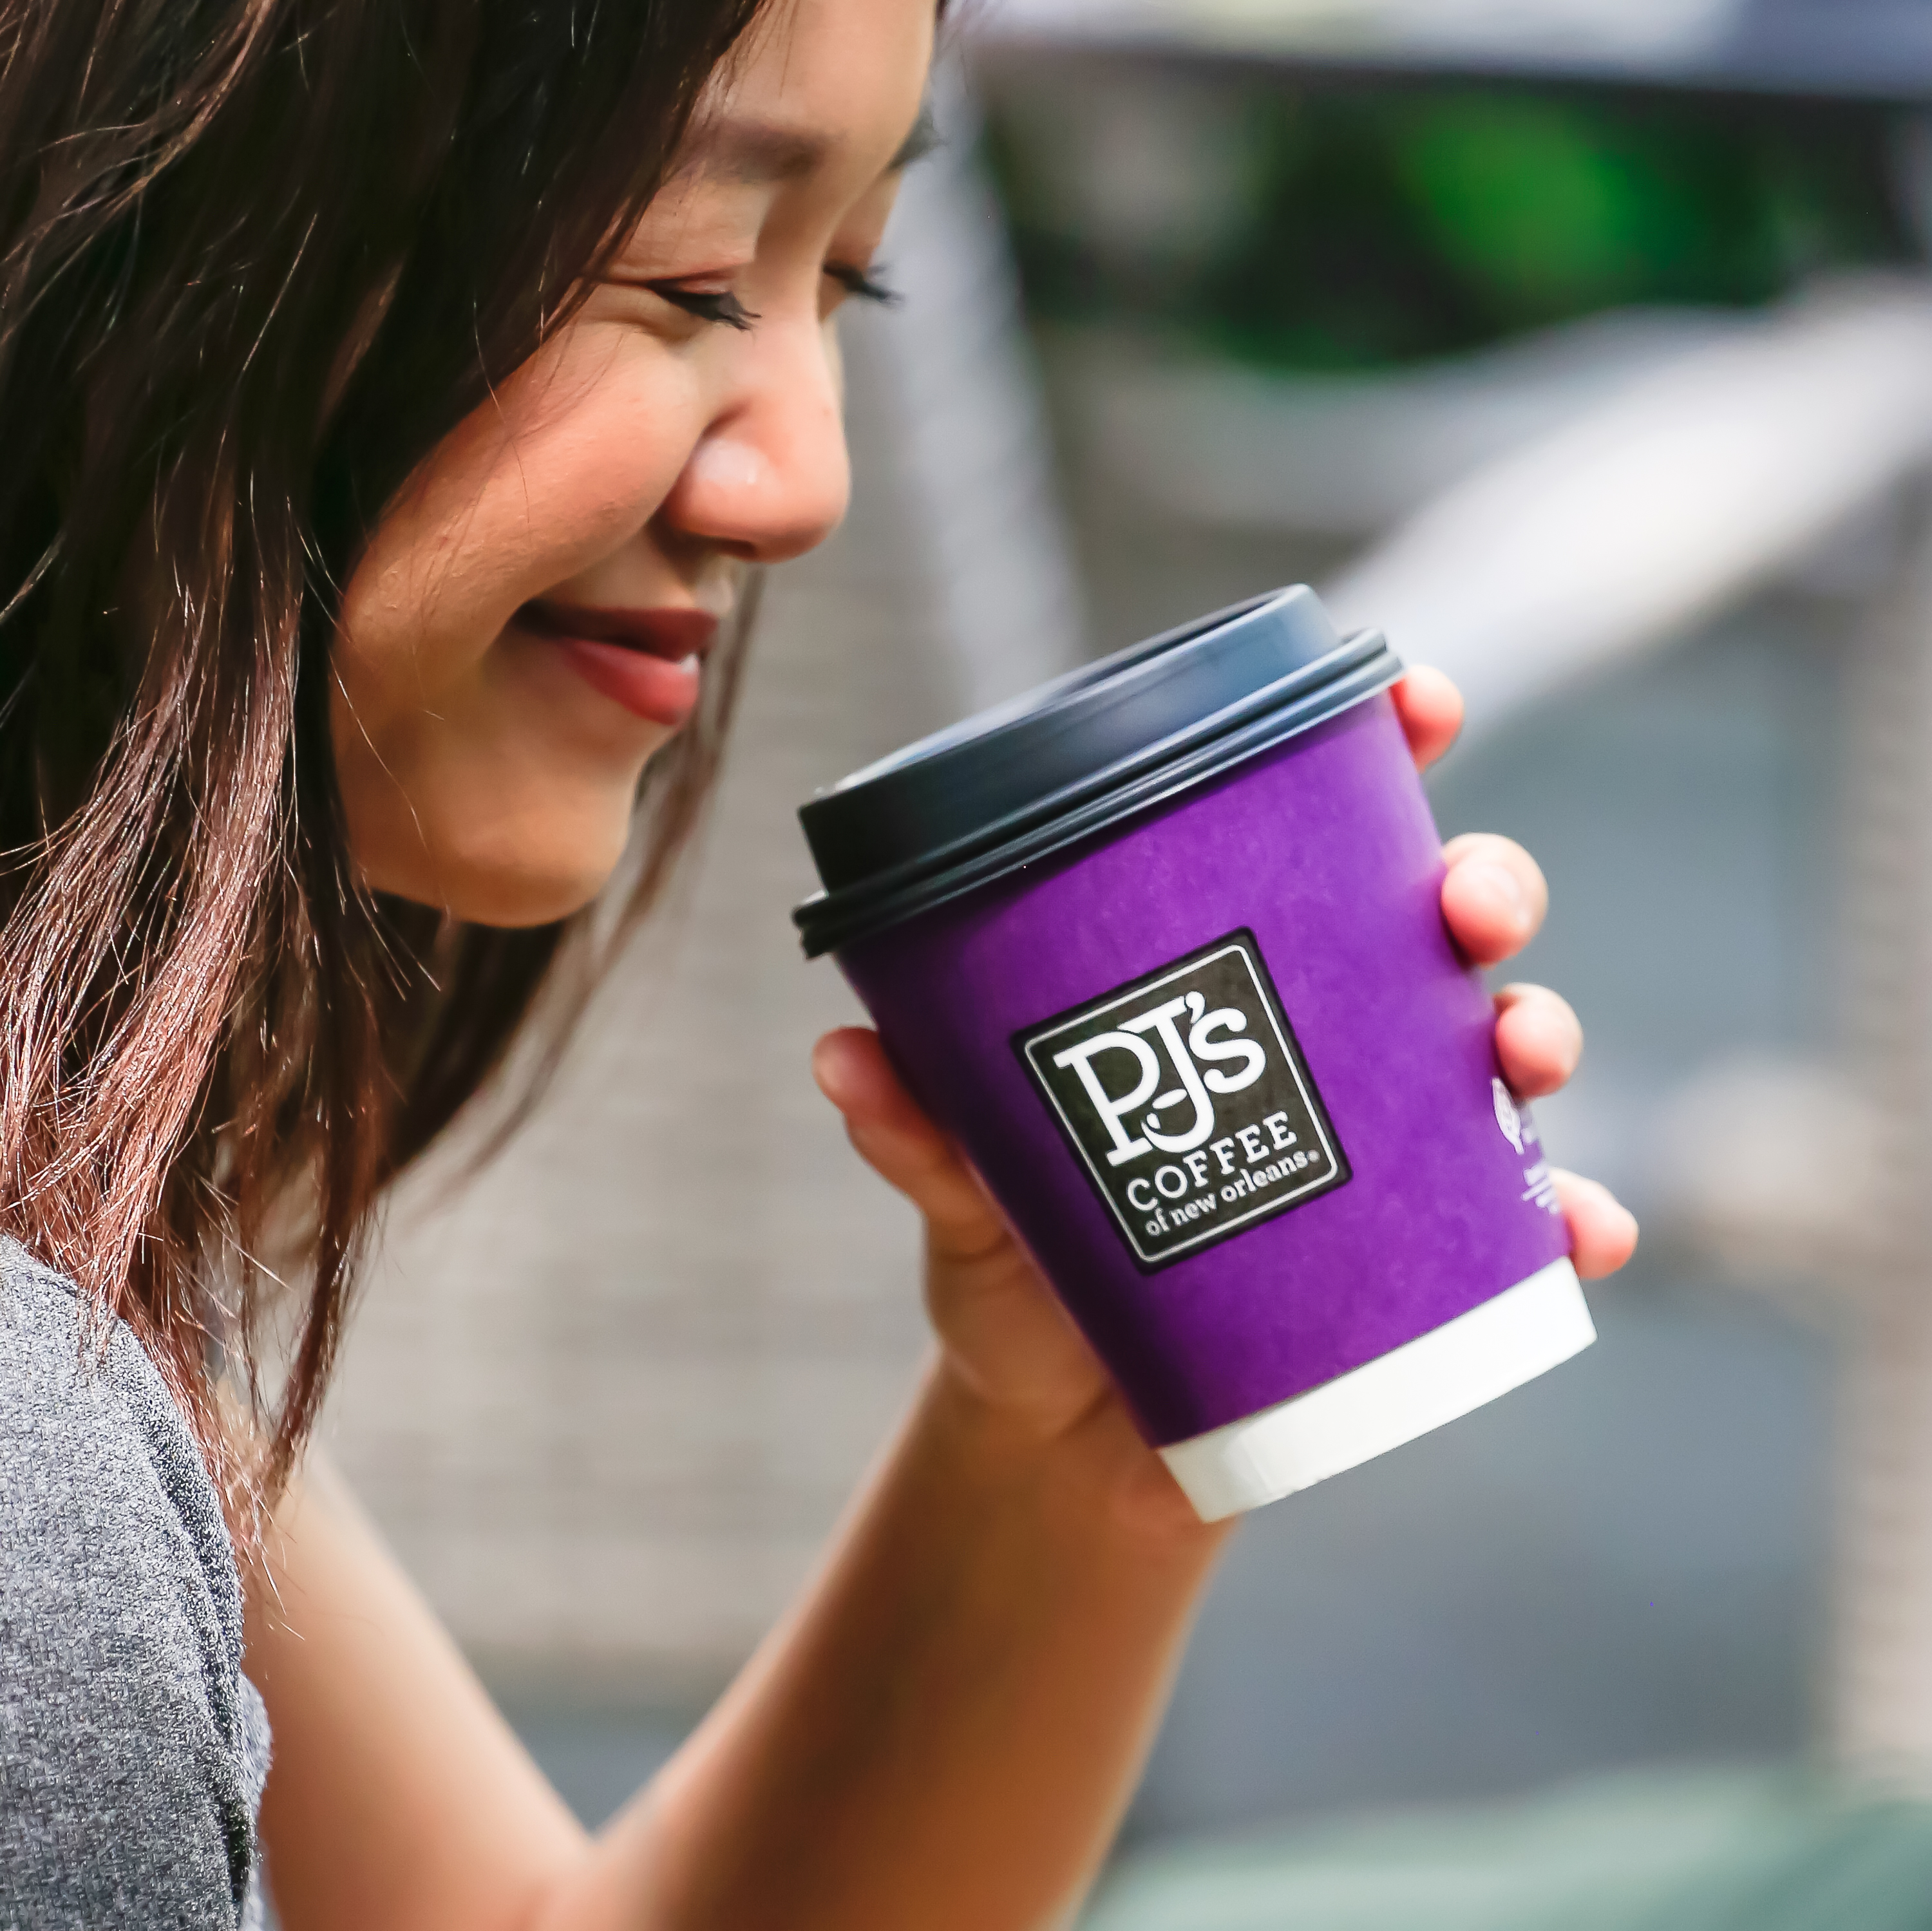 customers enjoy PJ's Coffee in more than 100 locations across the U.S. 